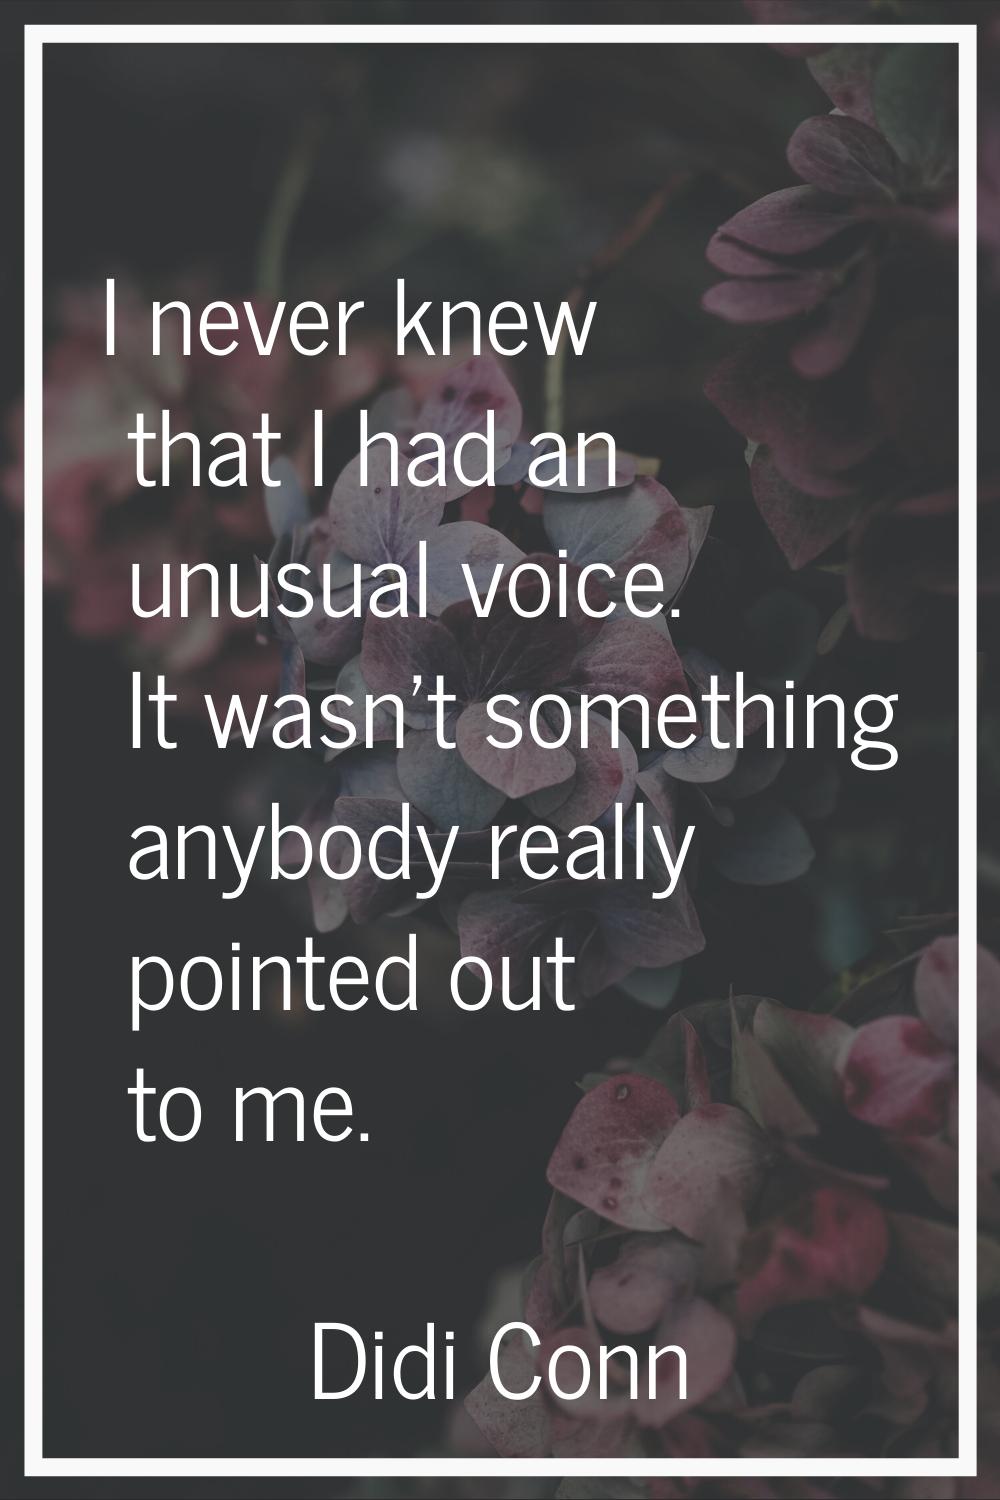 I never knew that I had an unusual voice. It wasn't something anybody really pointed out to me.